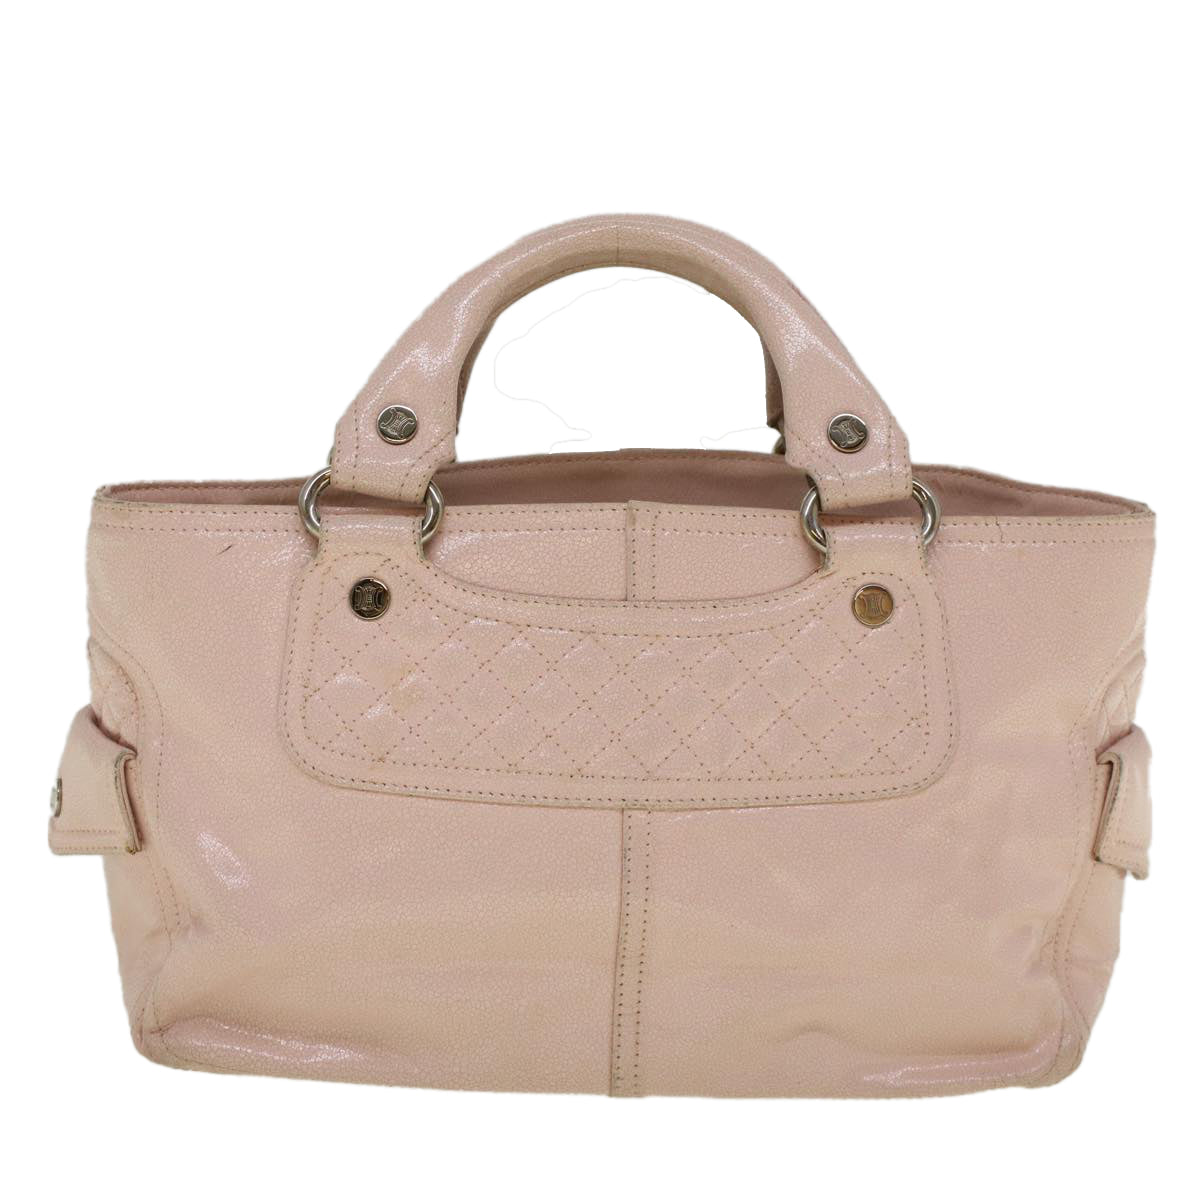 CELINE Hand Bag Leather Pink Auth bs9529 - 0